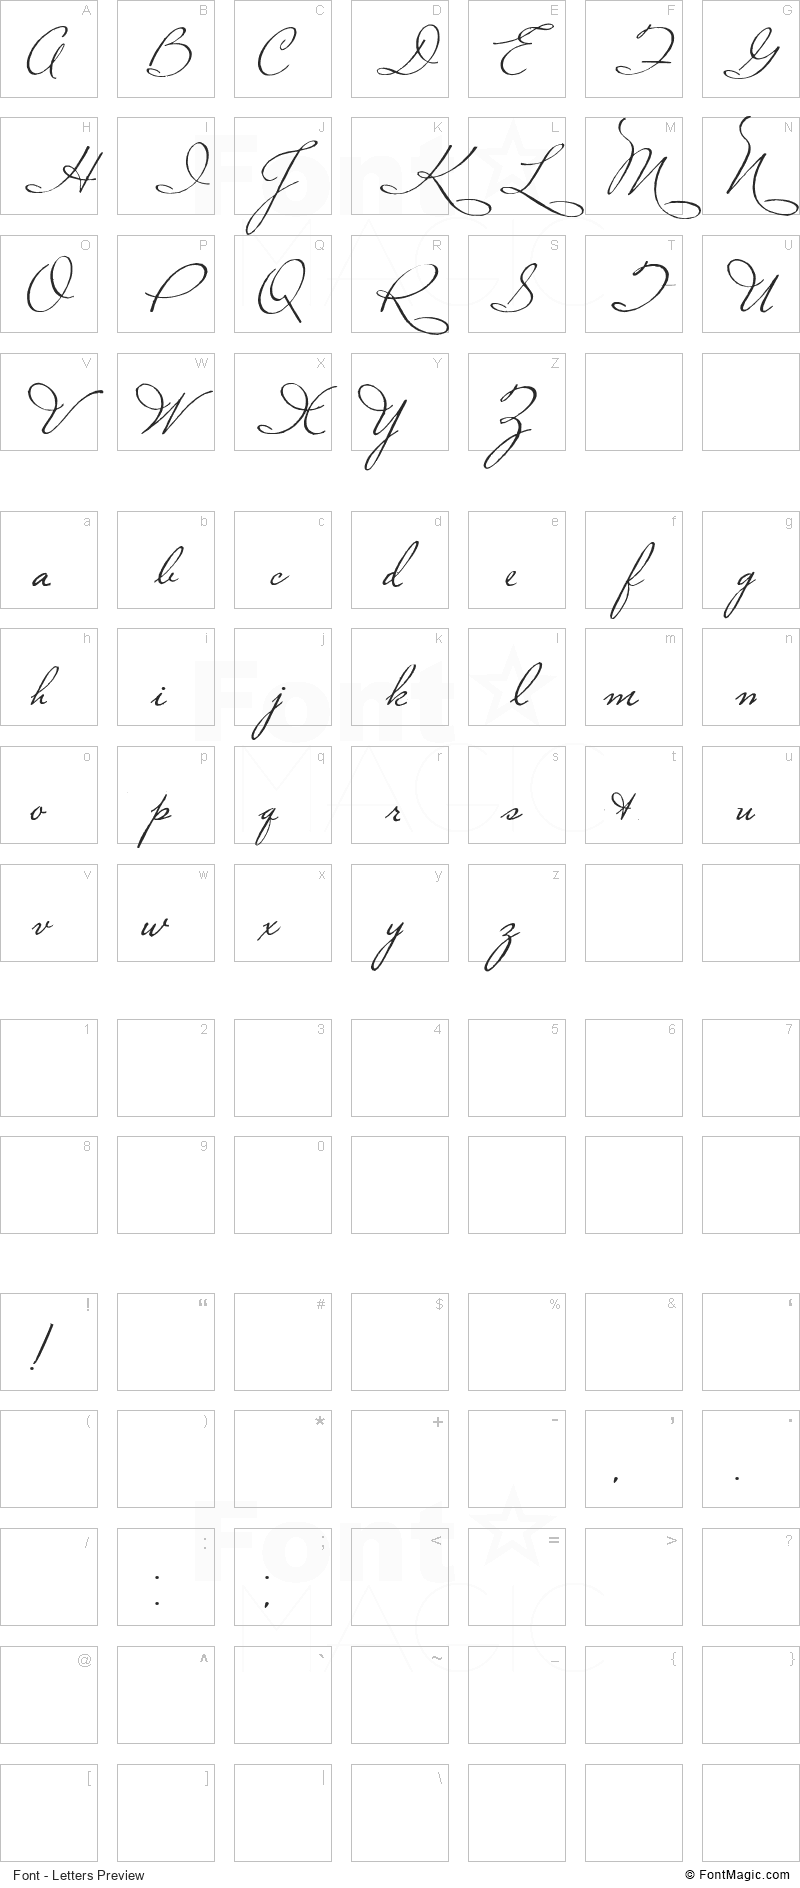 Plaster of Paris Font - All Latters Preview Chart